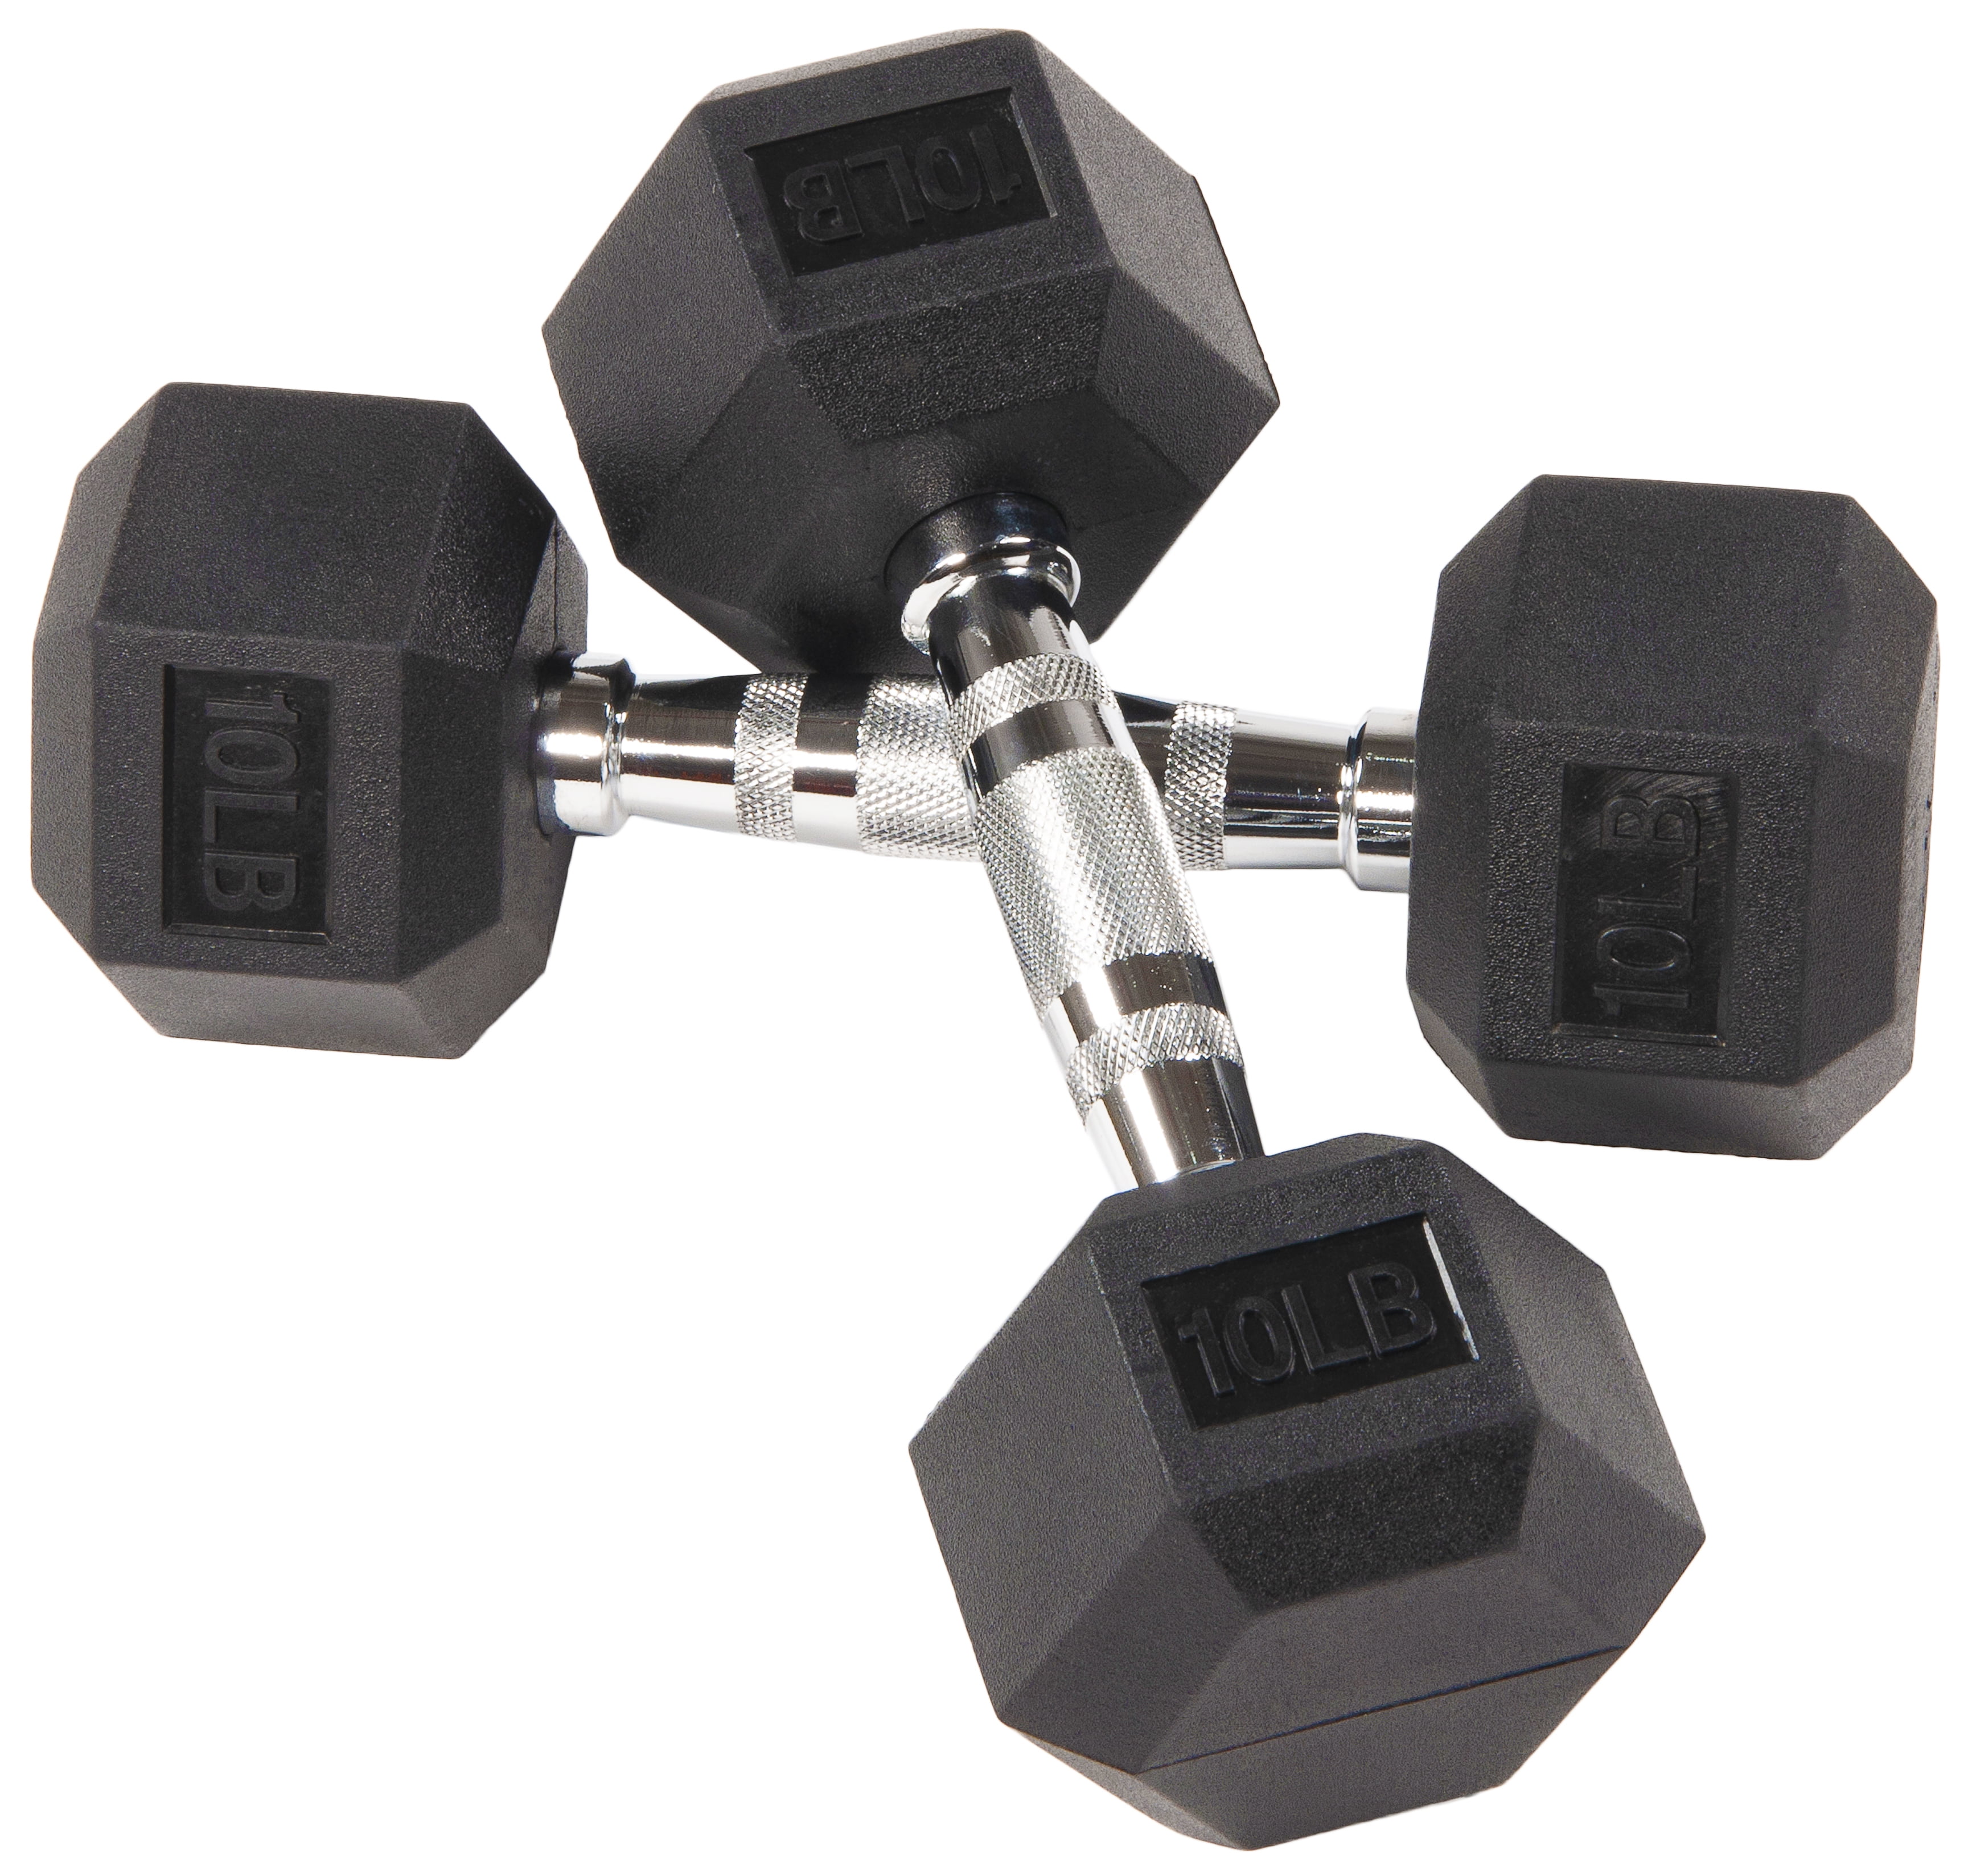 Details about   New 10 lb Rubber Hex Dumbbell Weights Ships FAST! Set of 2-20 pounds total 